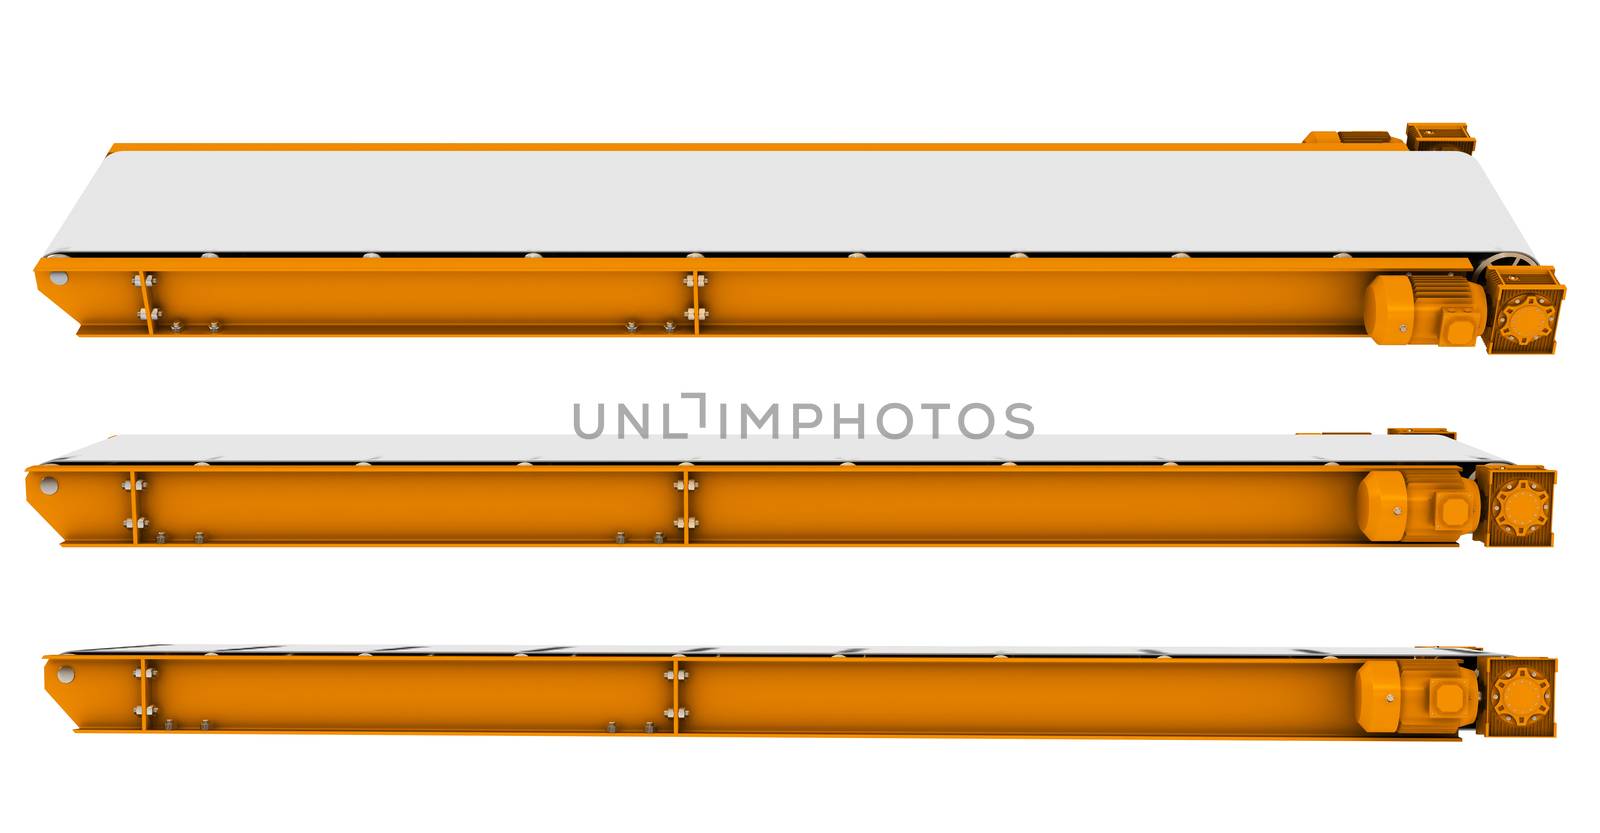 Set of transporters without wheels on isolated white background, front view